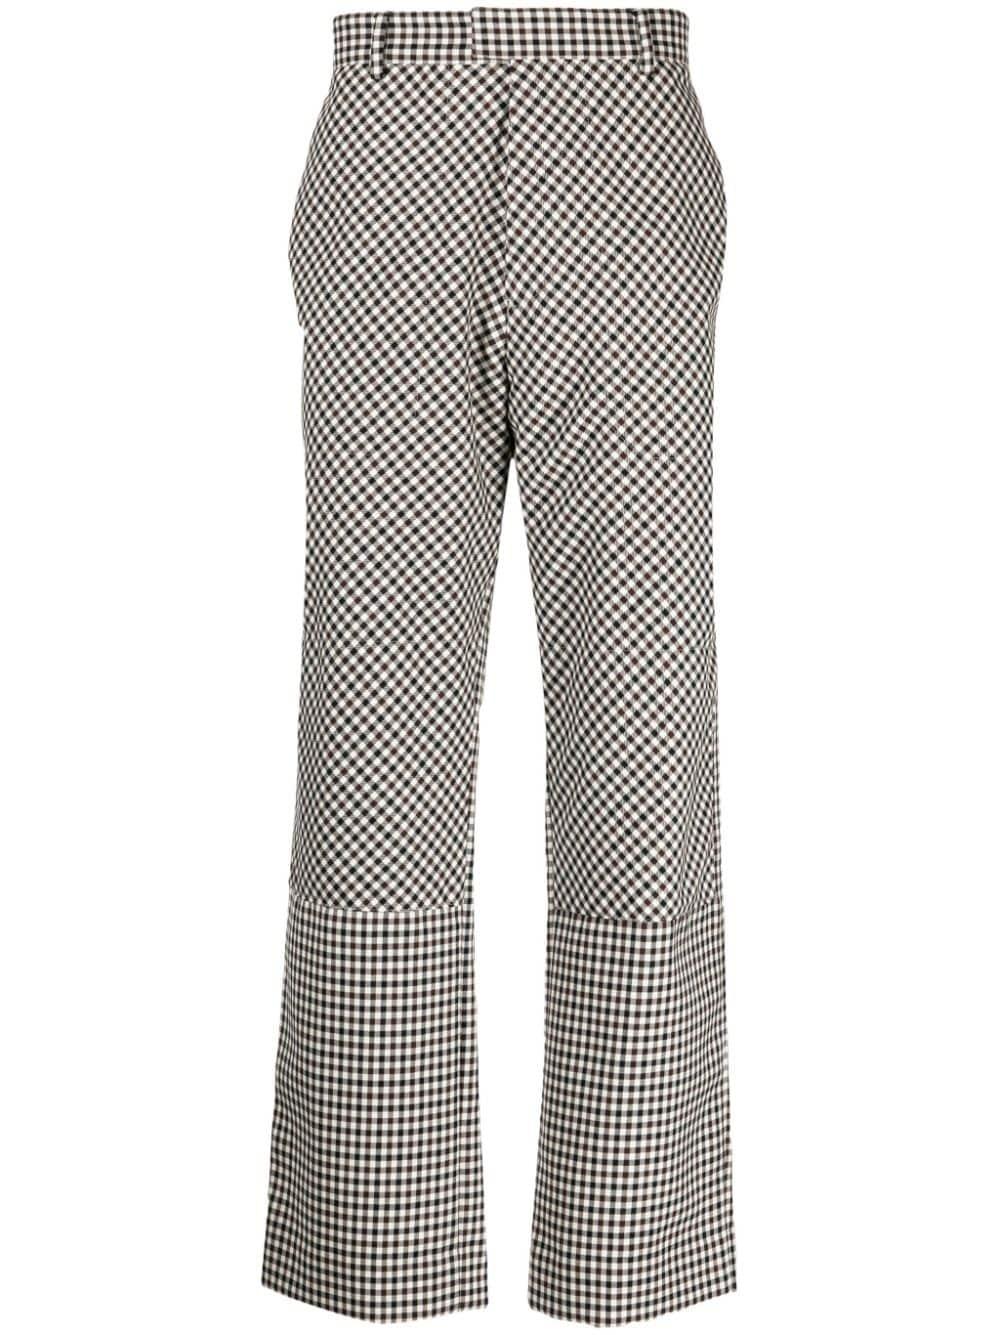 https://cdna.lystit.com/photos/farfetch/59418899/paul-smith-brown-Grid-pattern-Tailored-Cropped-Trousers.jpeg